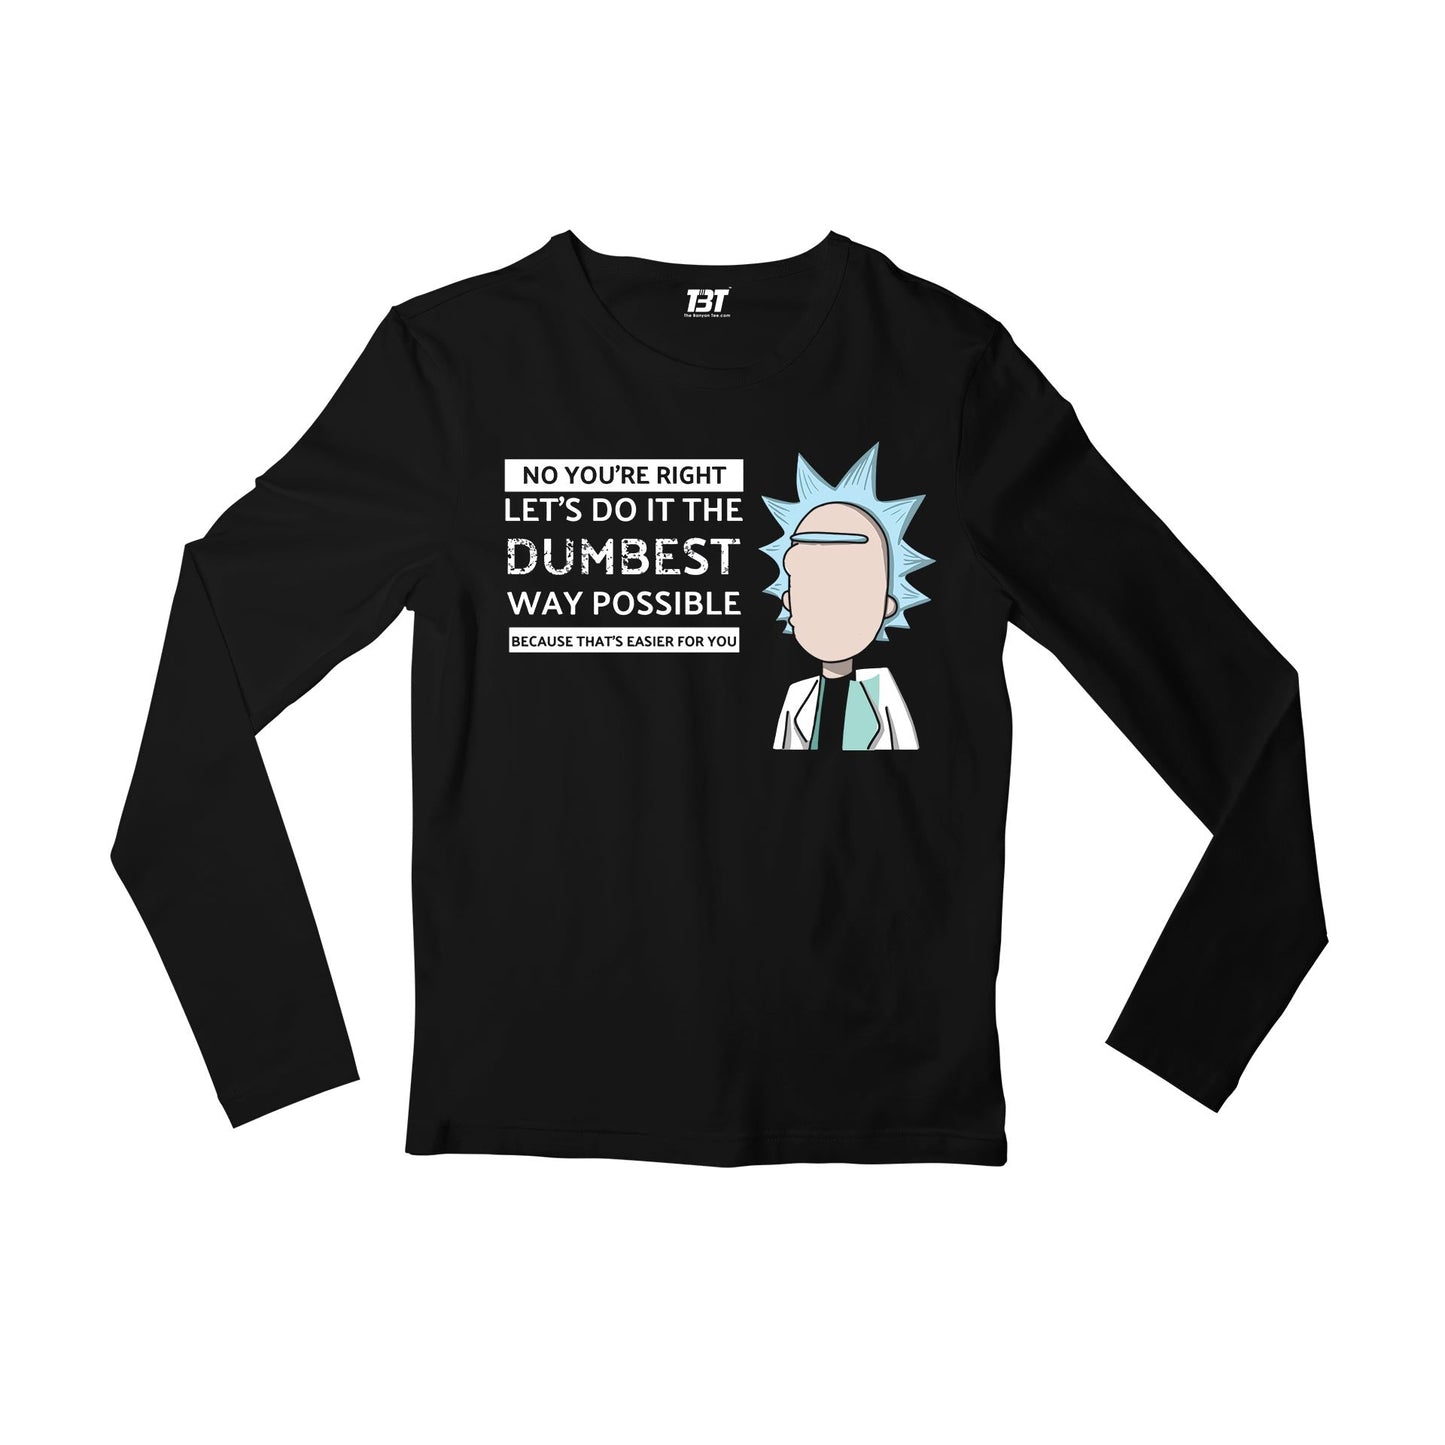 rick and morty dumbest way full sleeves long sleeves buy online india the banyan tee tbt men women girls boys unisex black rick and morty online summer beth mr meeseeks jerry quote vector art clothing accessories merchandise